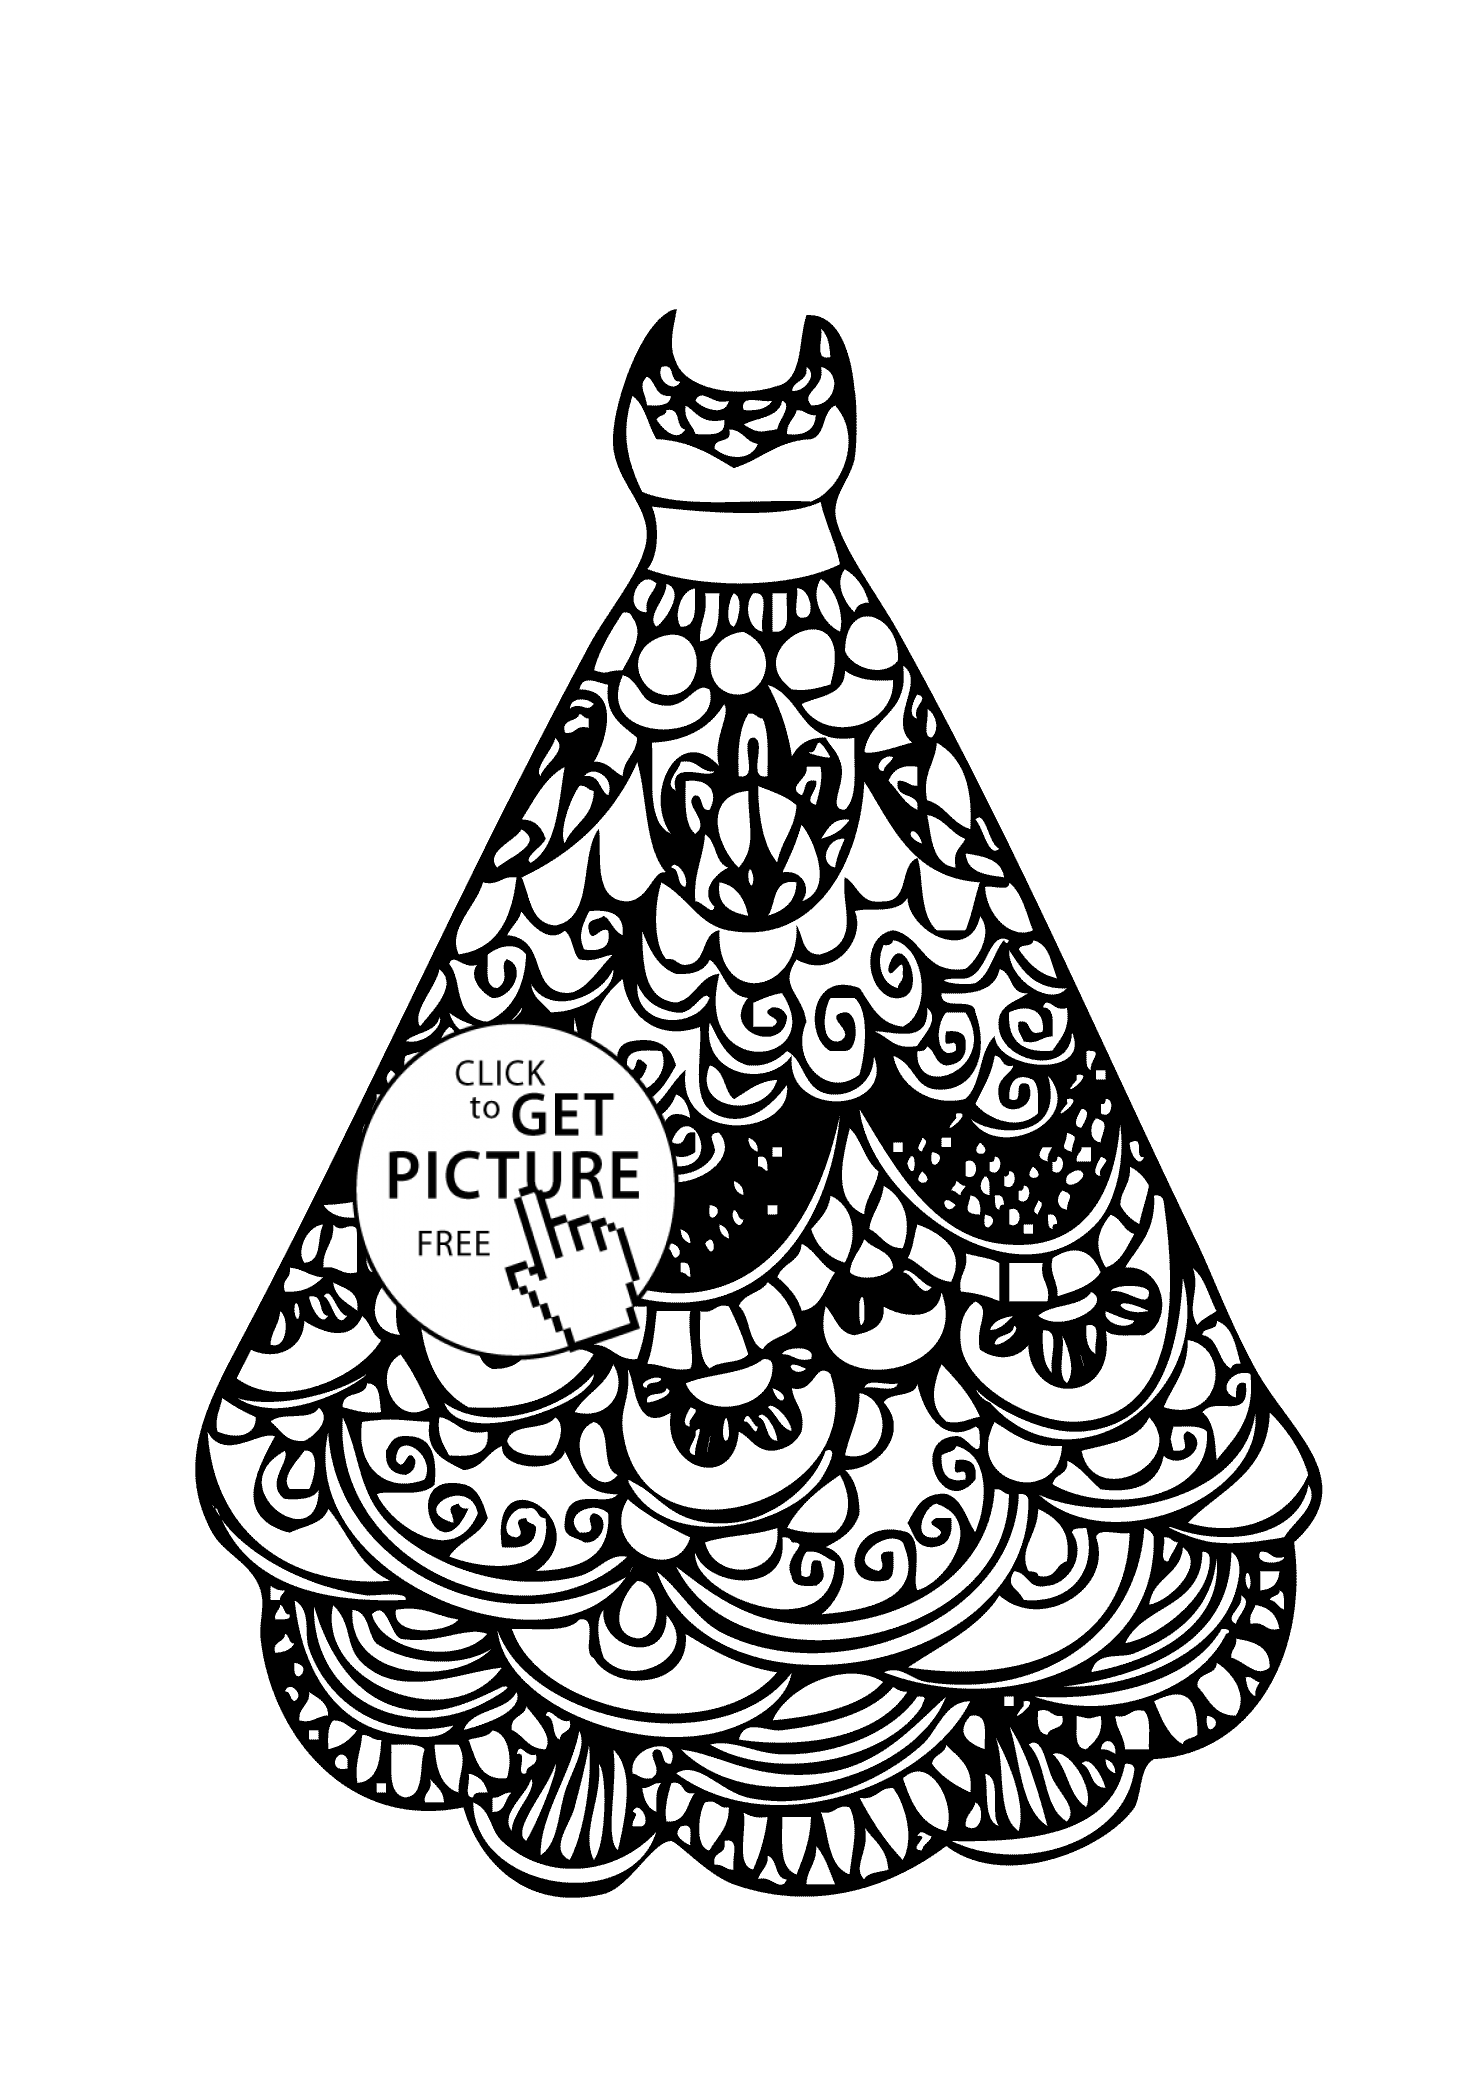 Coloring pages for girls free, printable and online